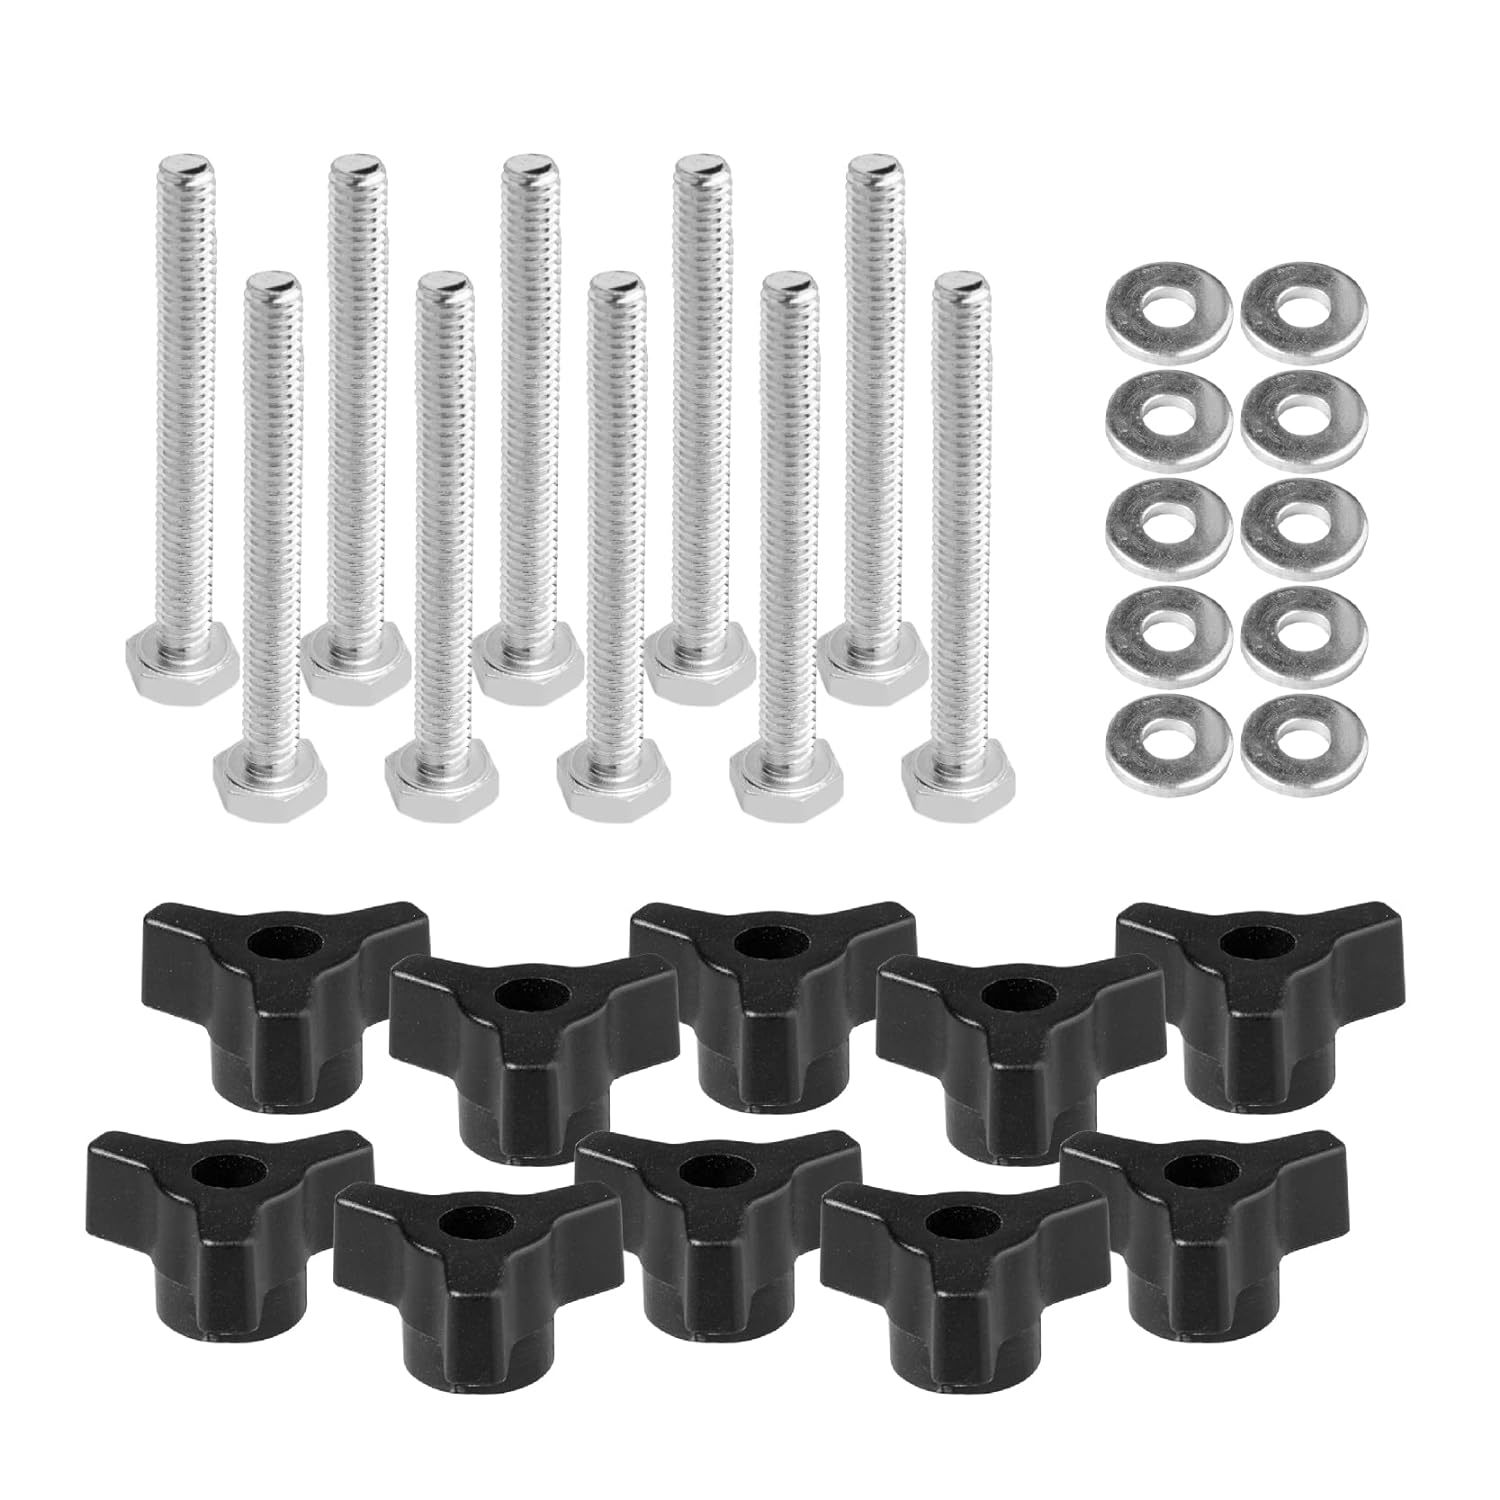 Primary image for T-Track Knobs With 1/4-20 By 1-1/2" Hex Bolts And Washers(Set Of 10)